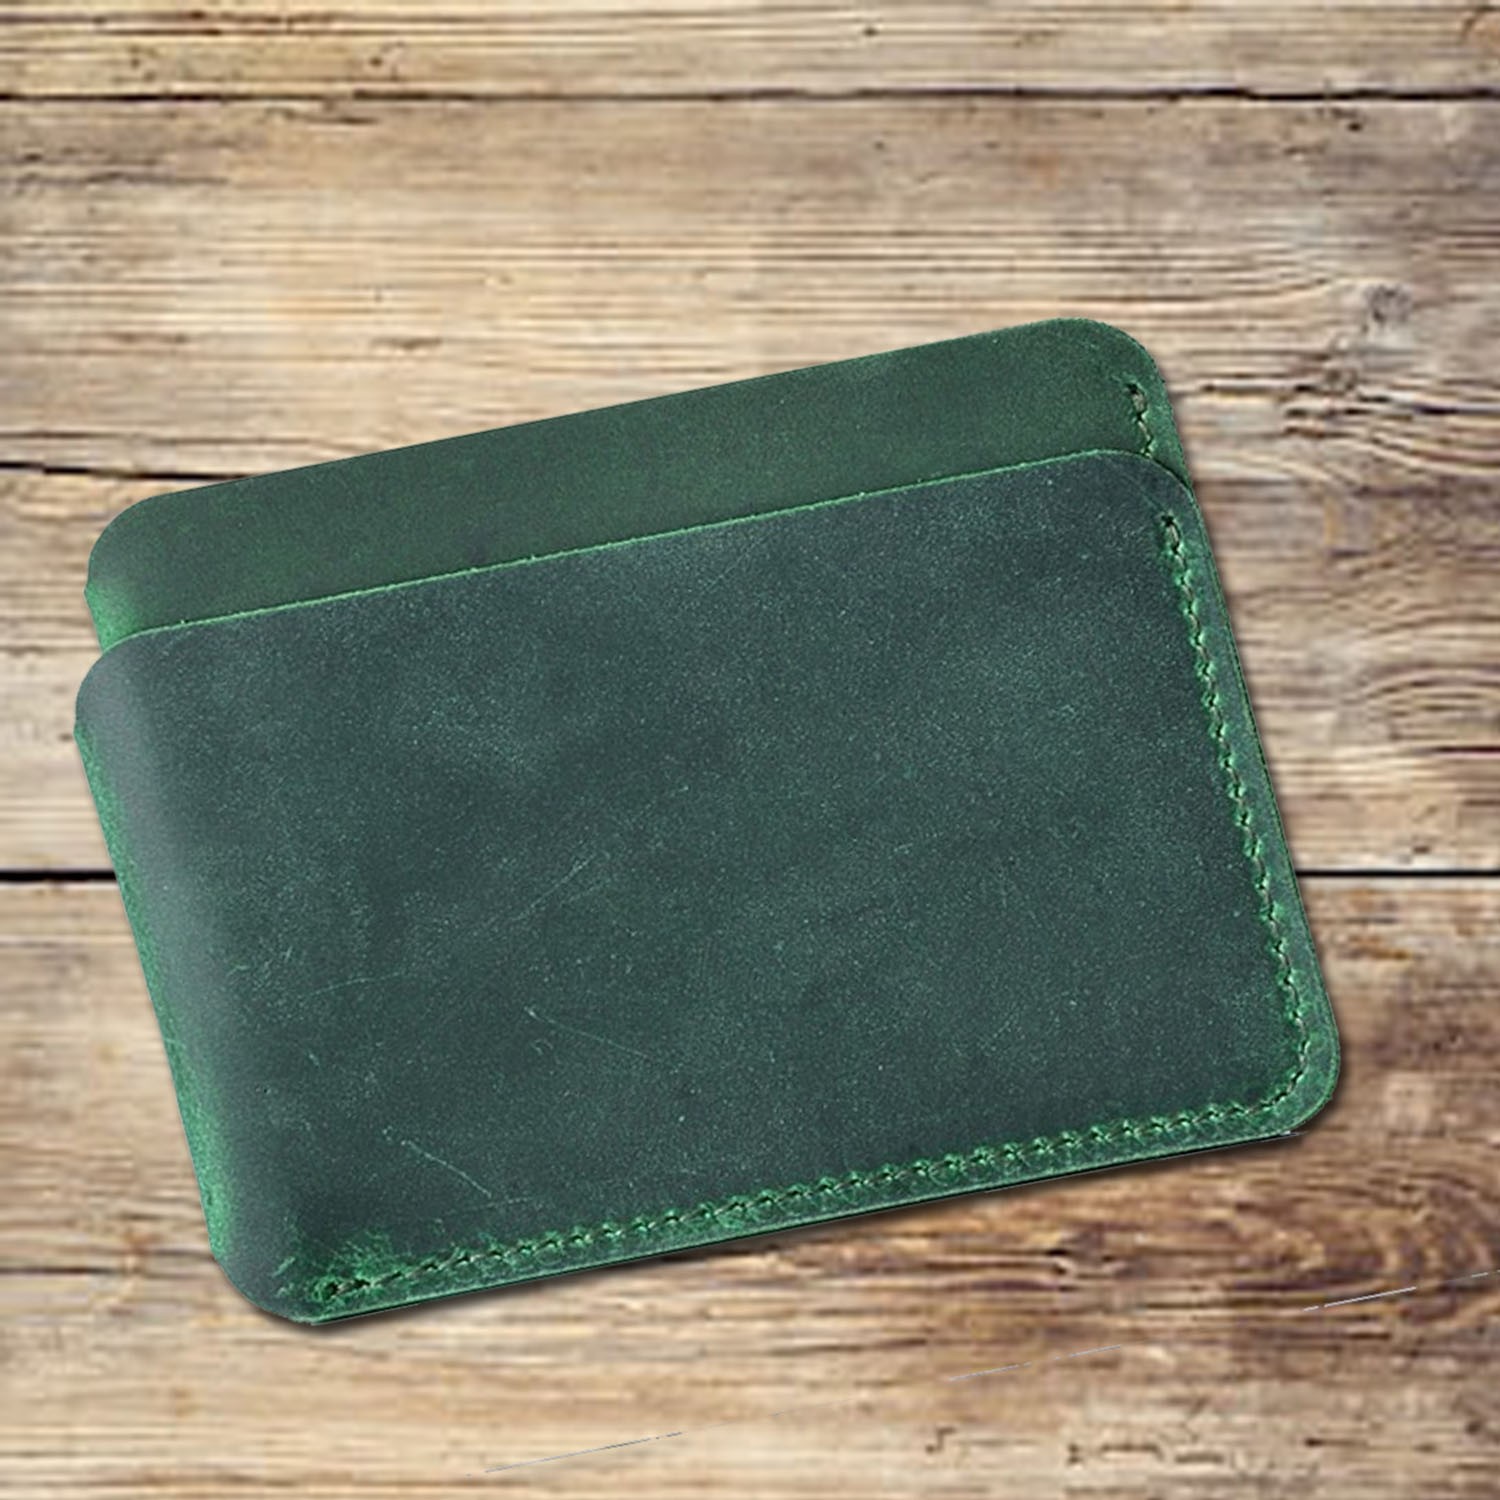 Handmade green leather card wallet